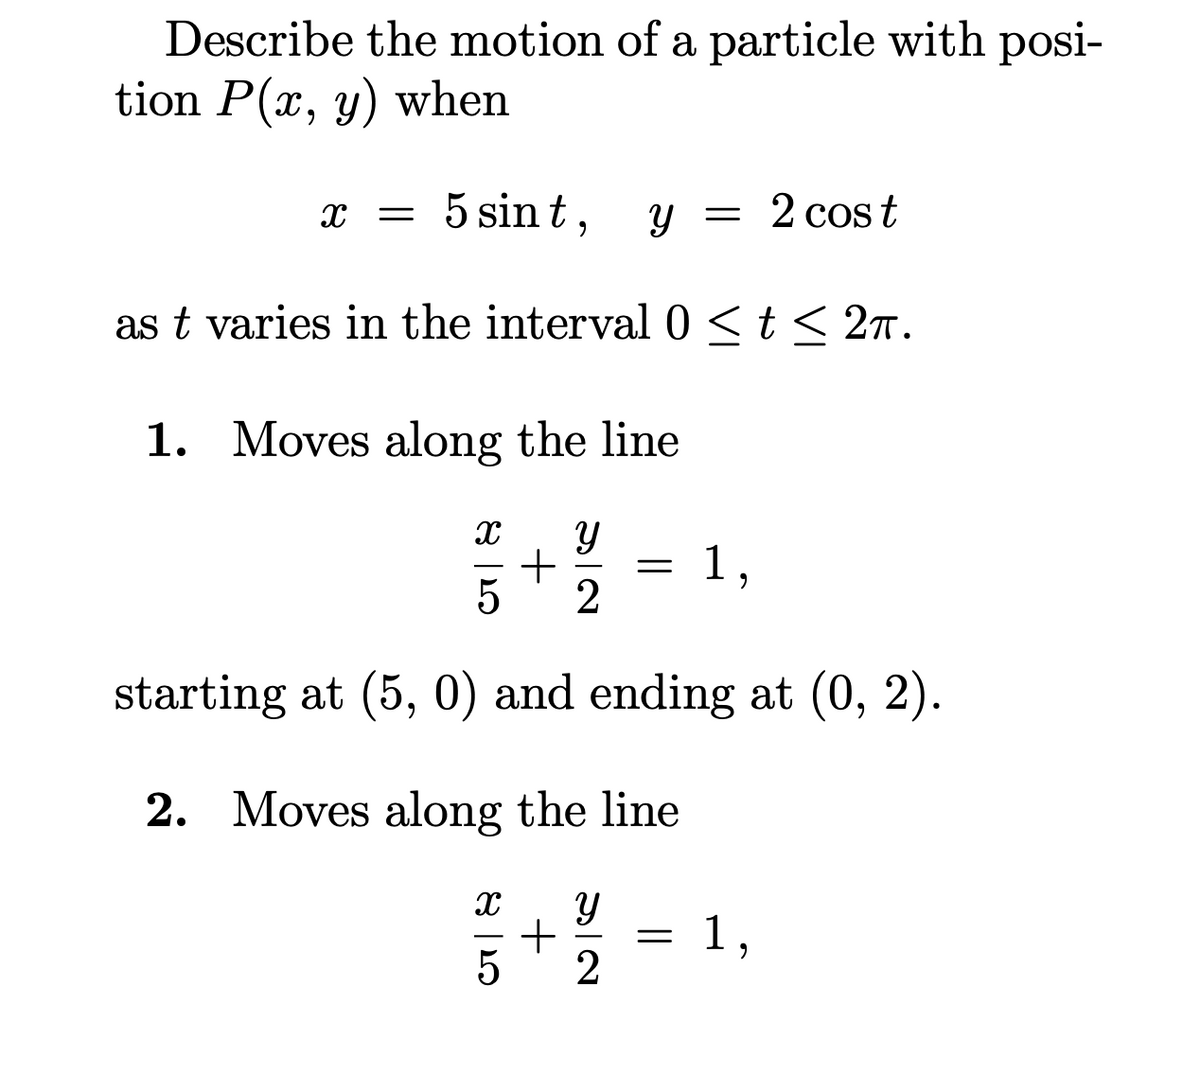 Describe the motion of a particle with posi-
tion P(x, y) when
5 sin t,
= 2 cost
as t varies in the interval 0<t< 2n.
1. Moves along the line
+
1,
starting at (5, 0) and ending at (0, 2).
2. Moves along the line
1,
2
+
